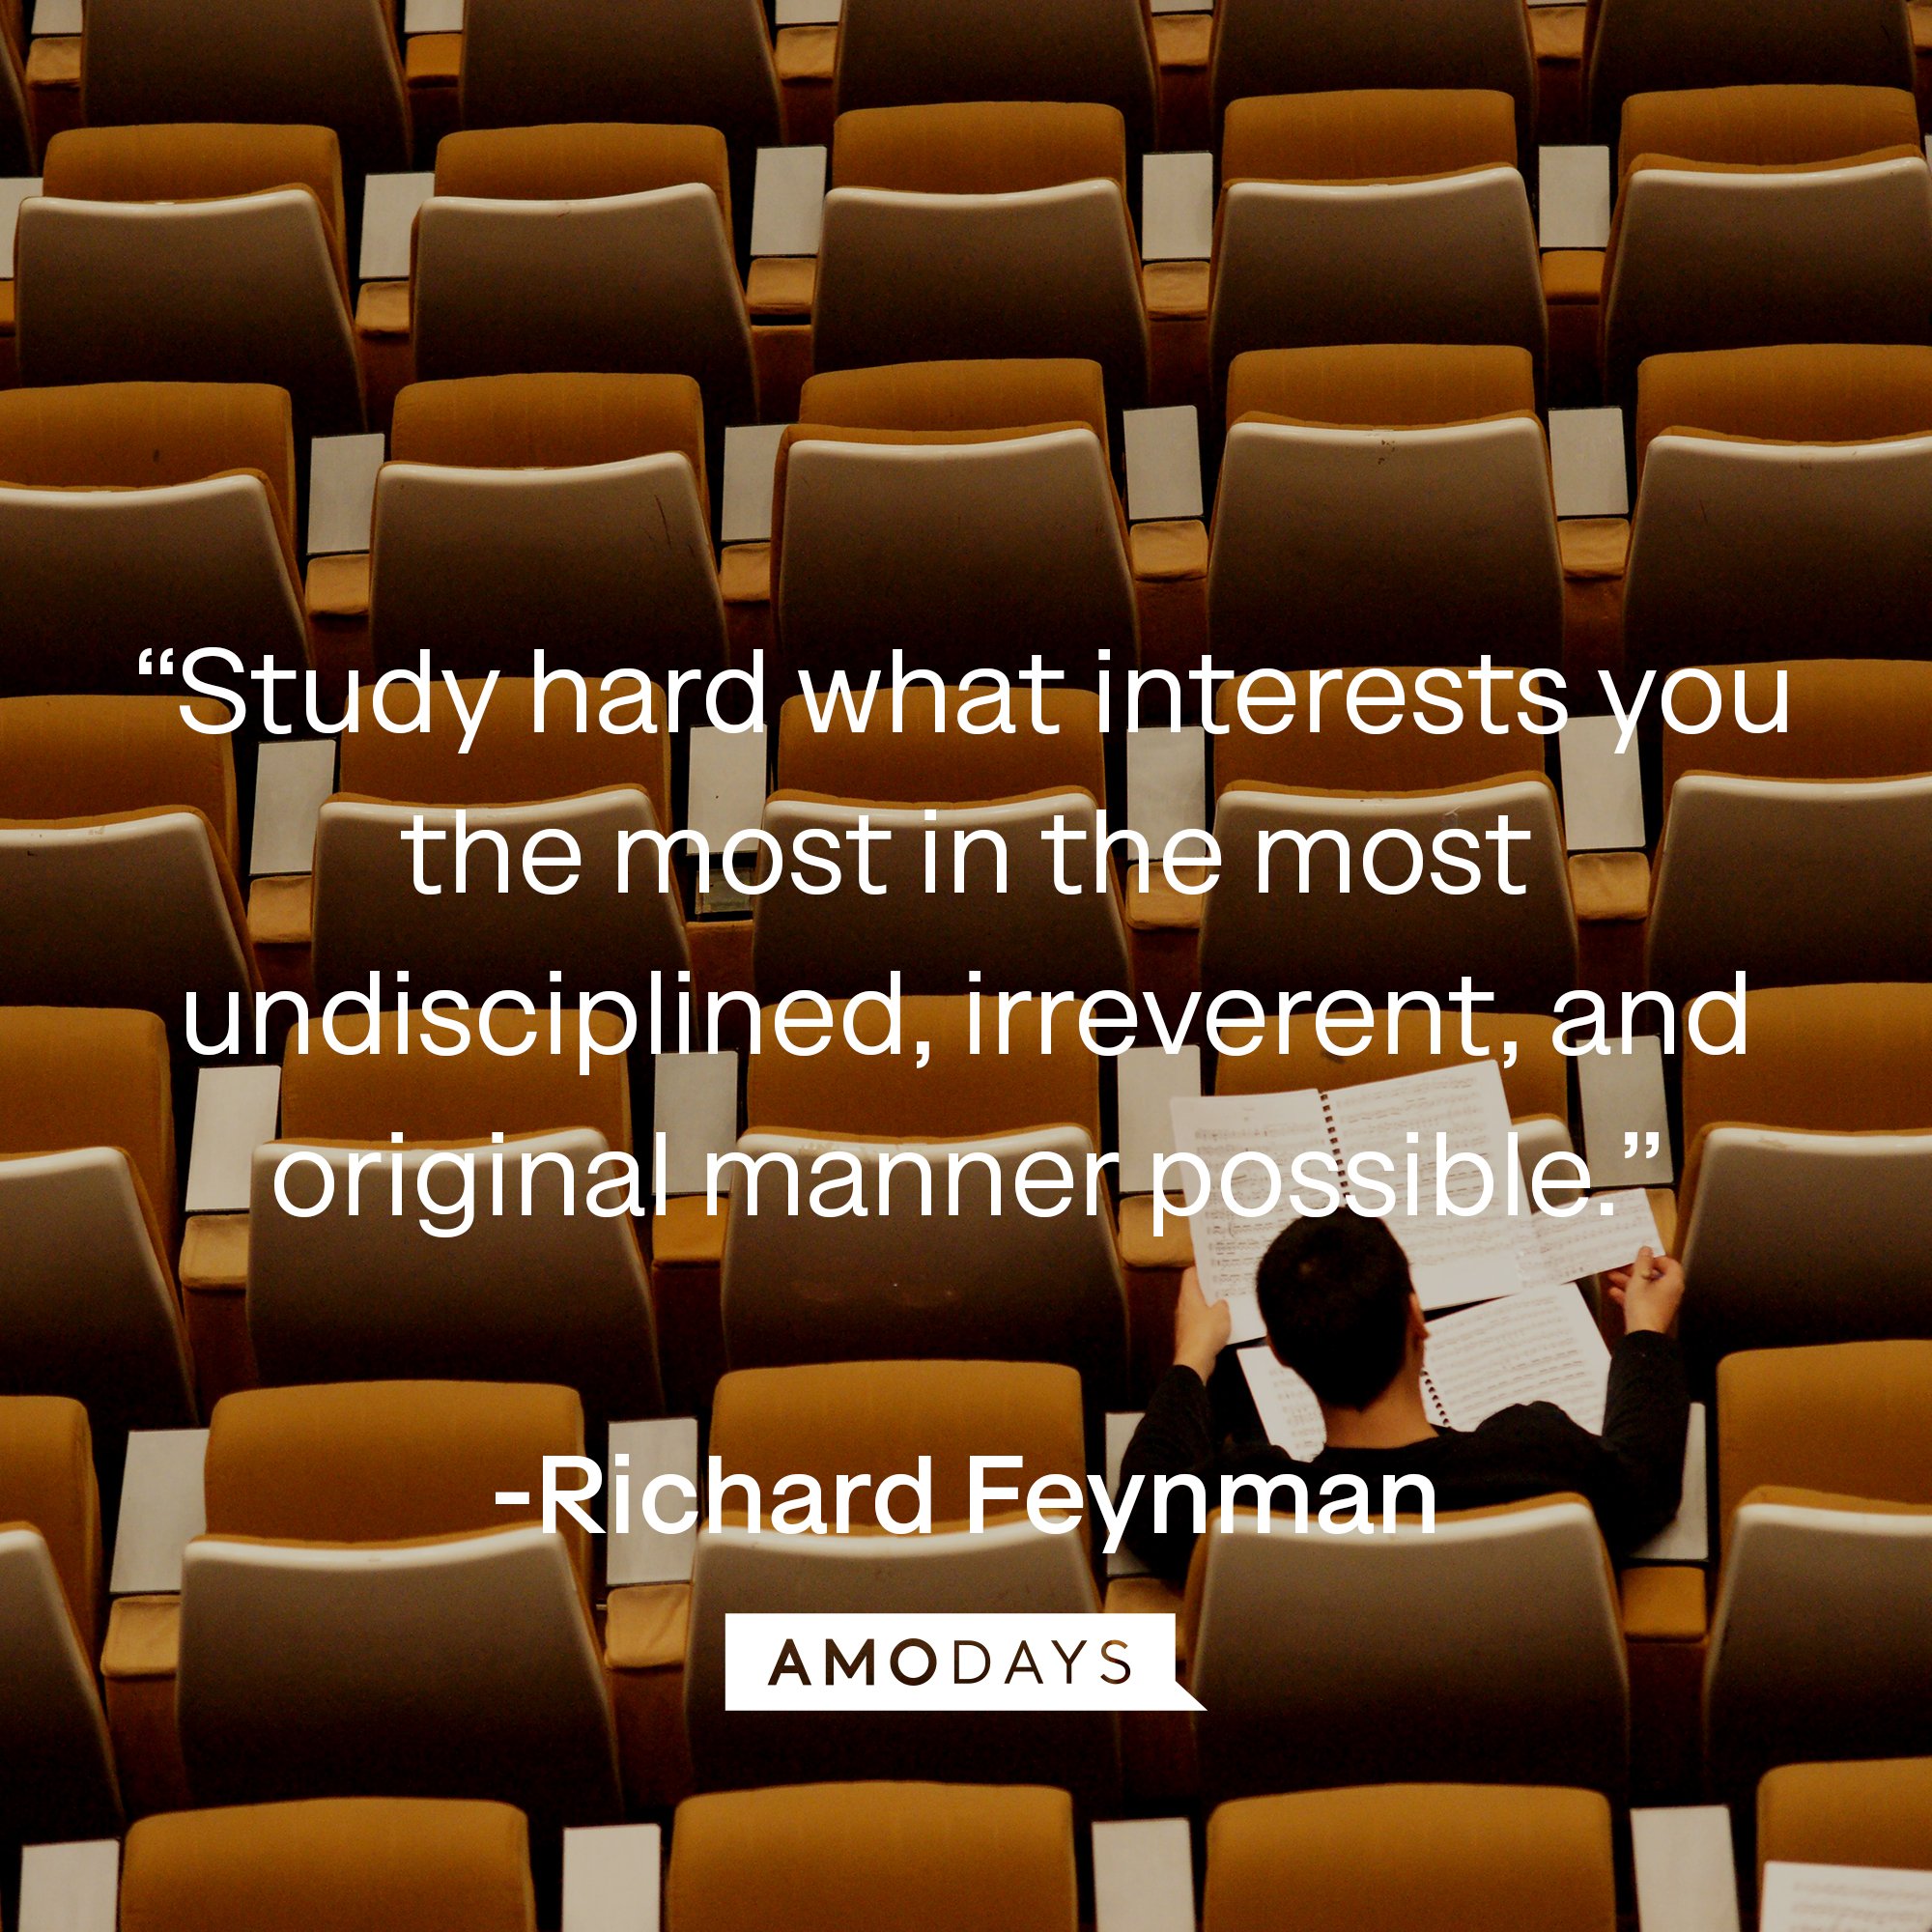  Richard Feynman's quote: “Study hard what interests you the most in the most undisciplined, irreverent, and original manner possible.” | Image: AmoDays